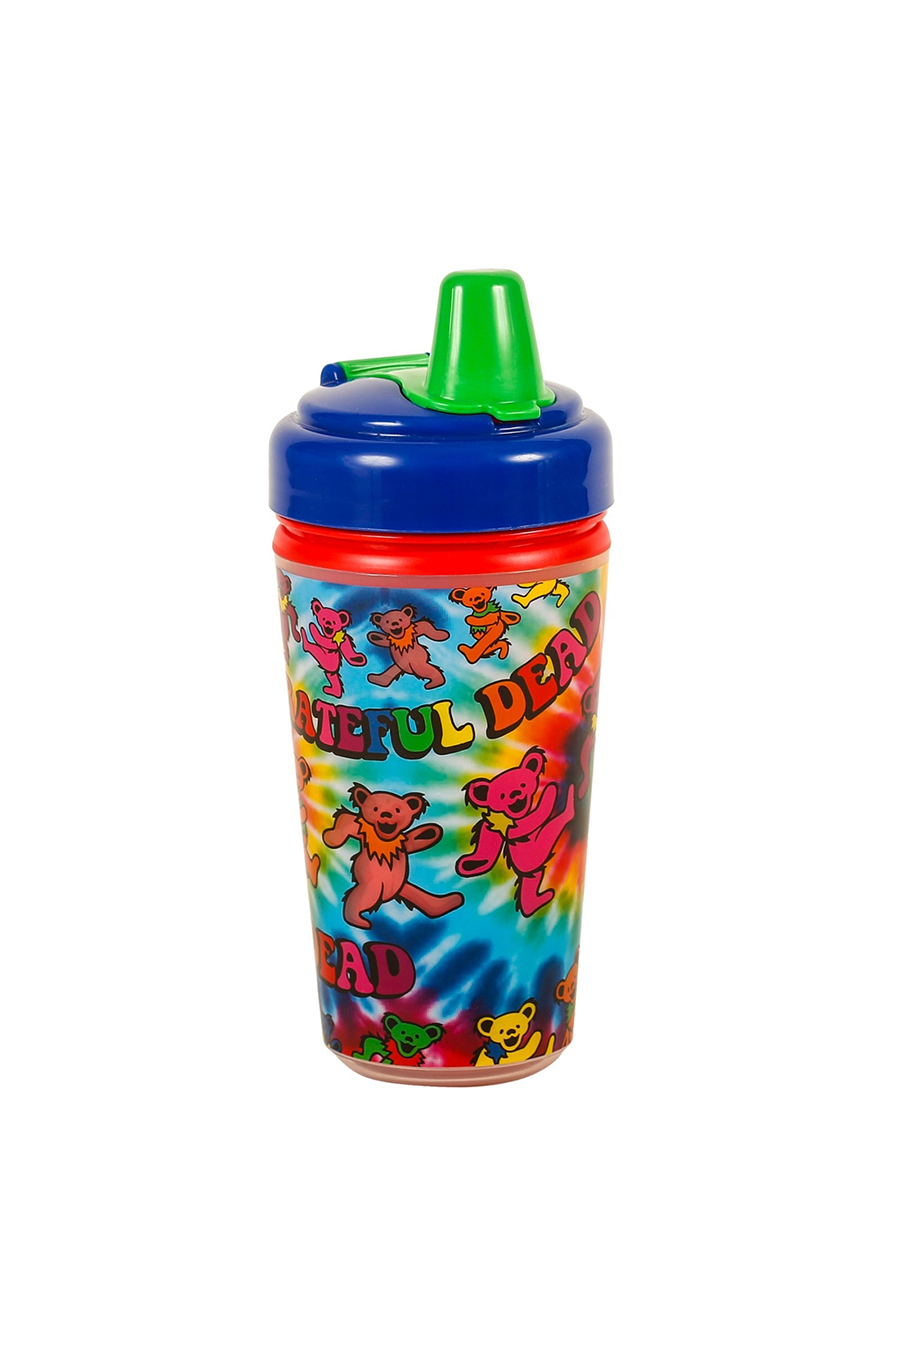 Grateful Dead Tie Dye Sippy Cup - Main Image Number 1 of 2